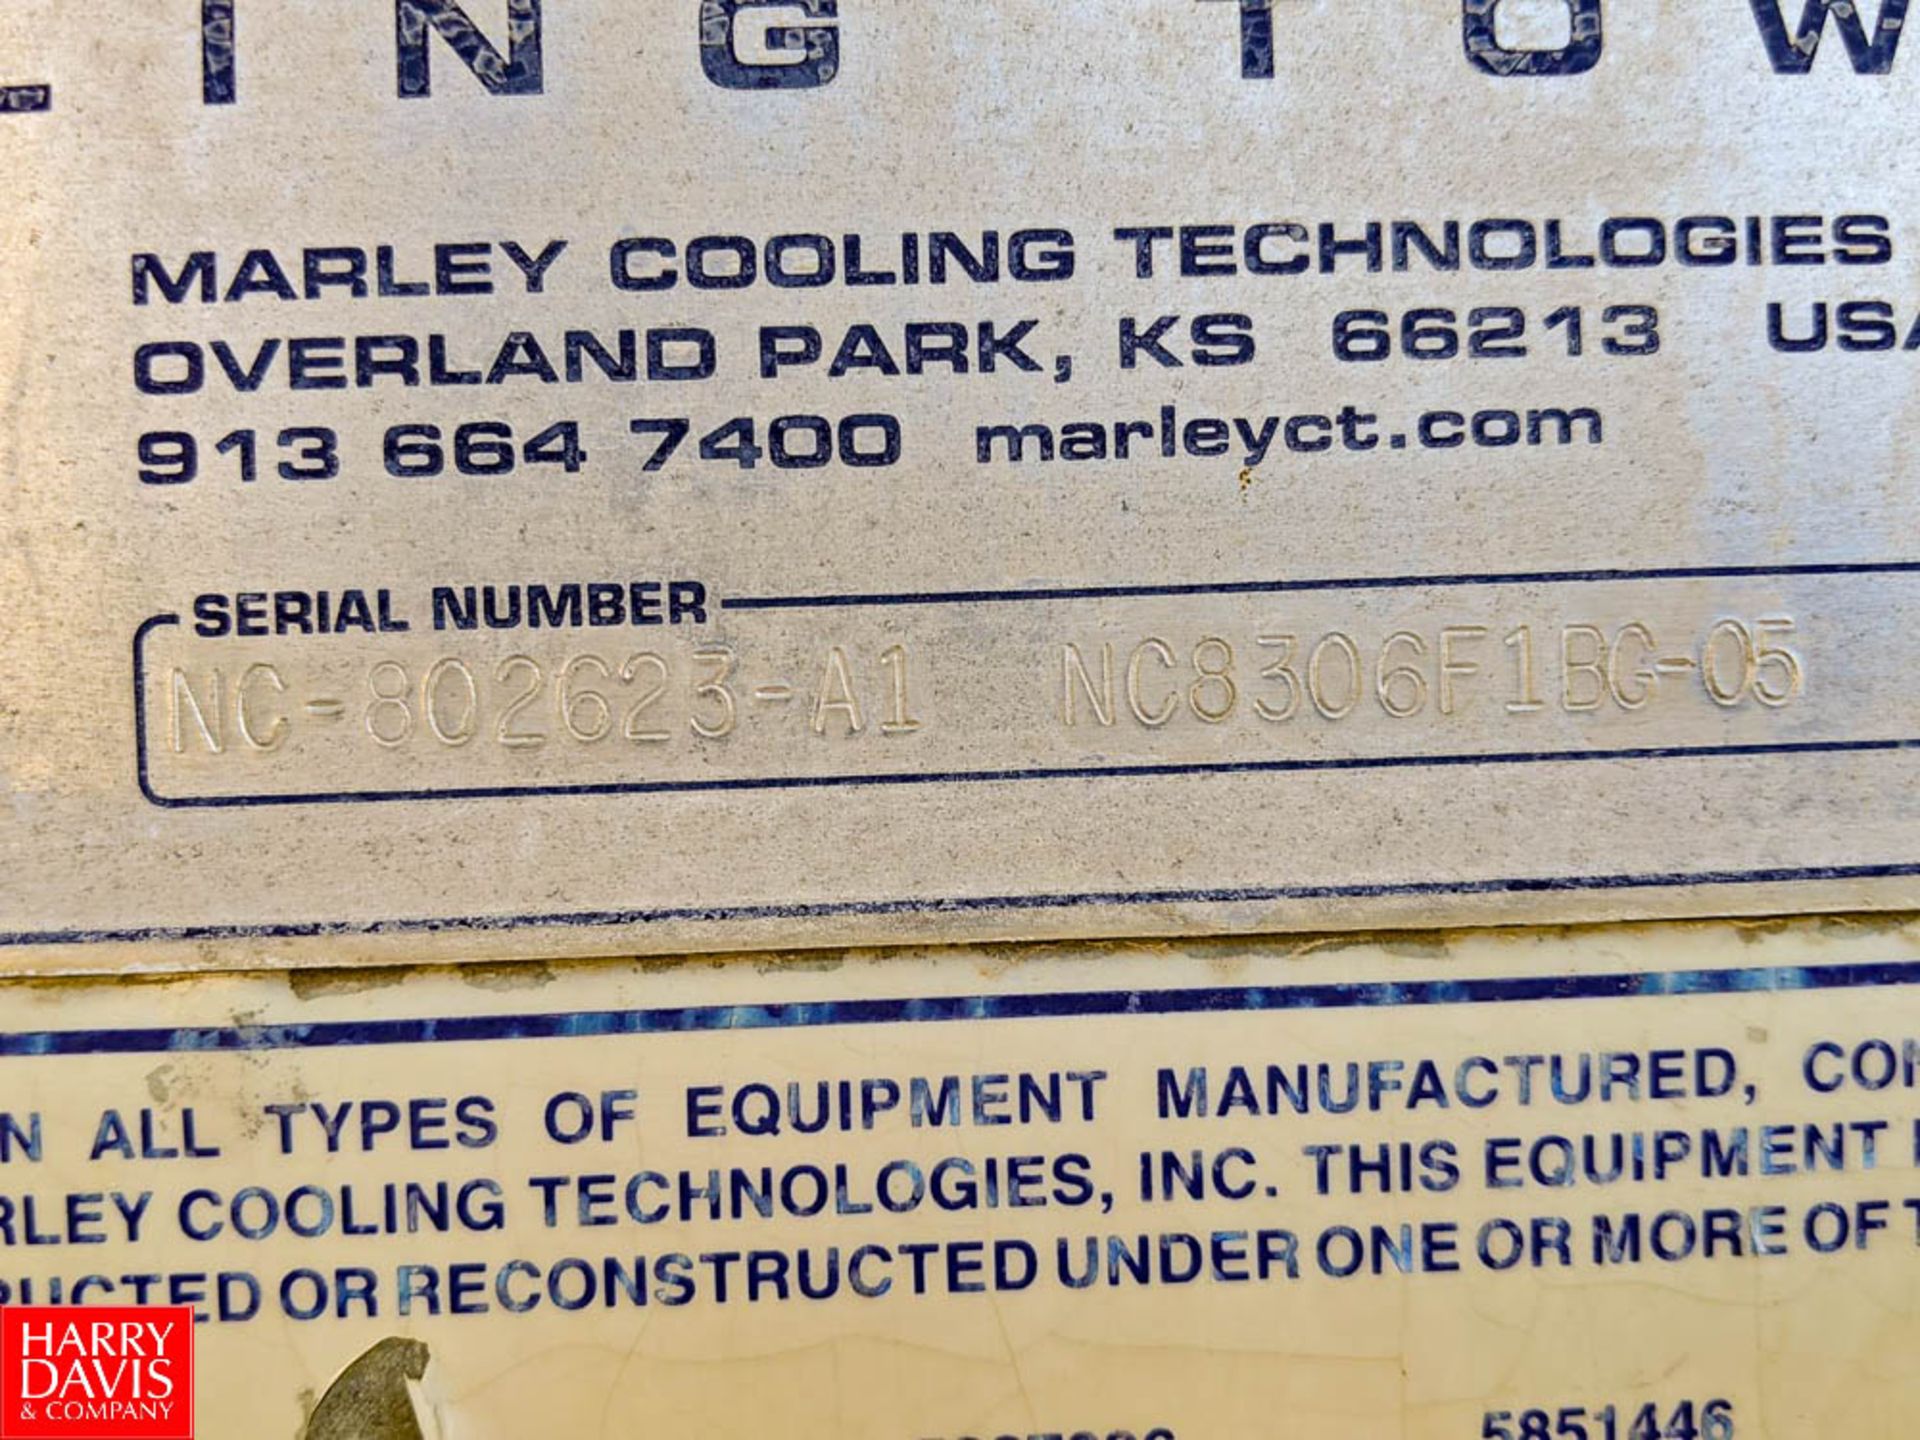 Marley Cooling Tower SN: NC-802623-A1 NC8306F1BG-05 (Loc. Roof) Rigging Fee: $8500 - Image 5 of 5